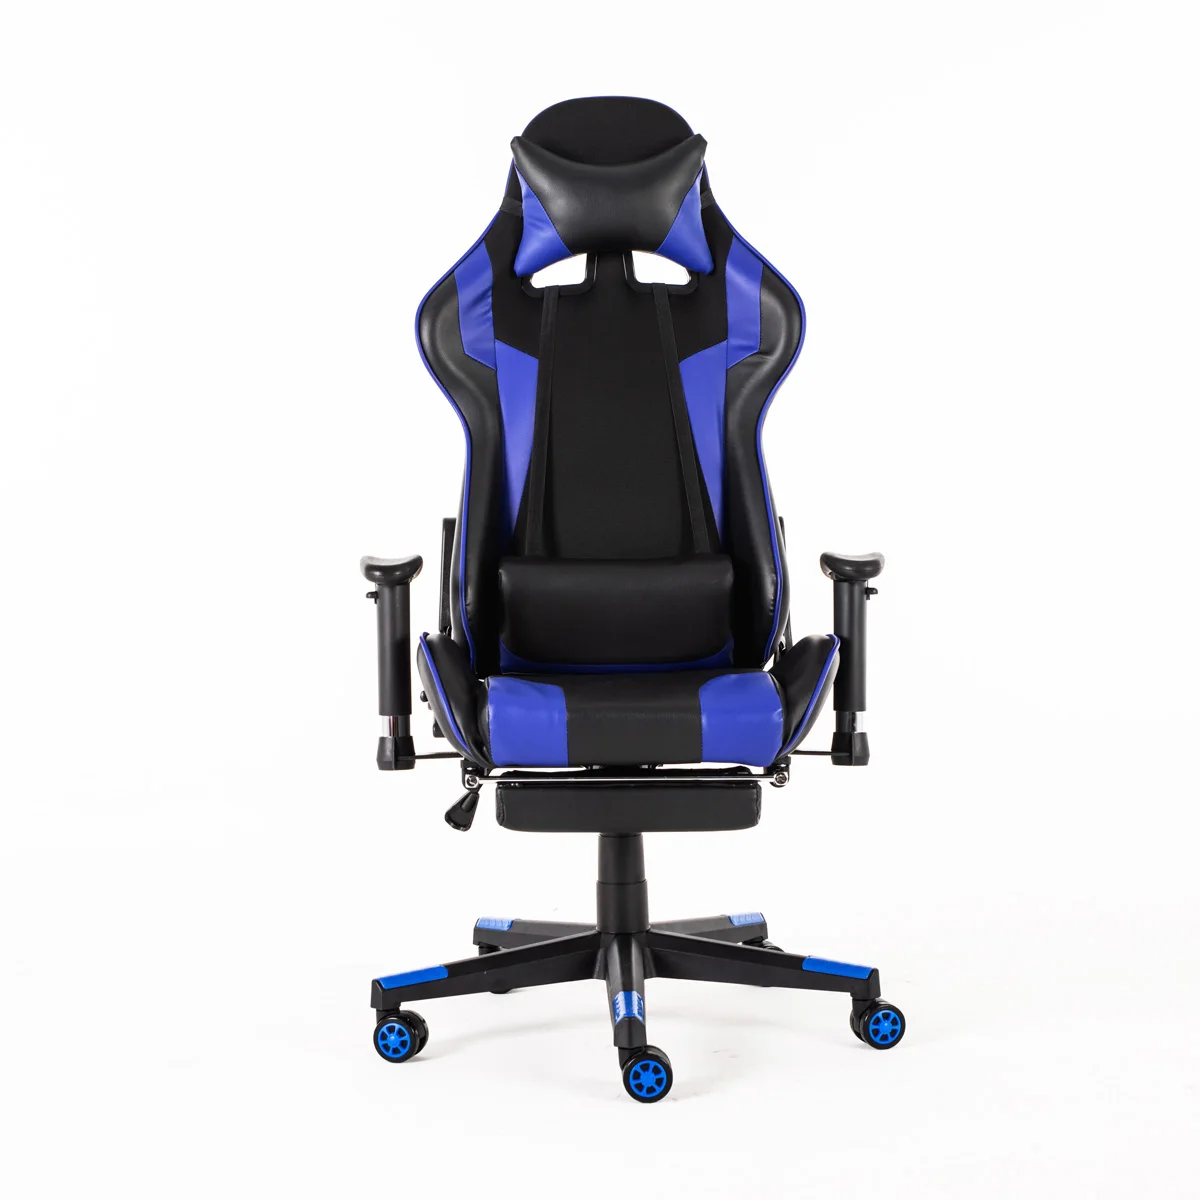 180° Wcg Gaming Chair Electrified Internet Cafe Armchair Ergonomic Computer Chair Lying Household Office Chair Footrest+ Pillow